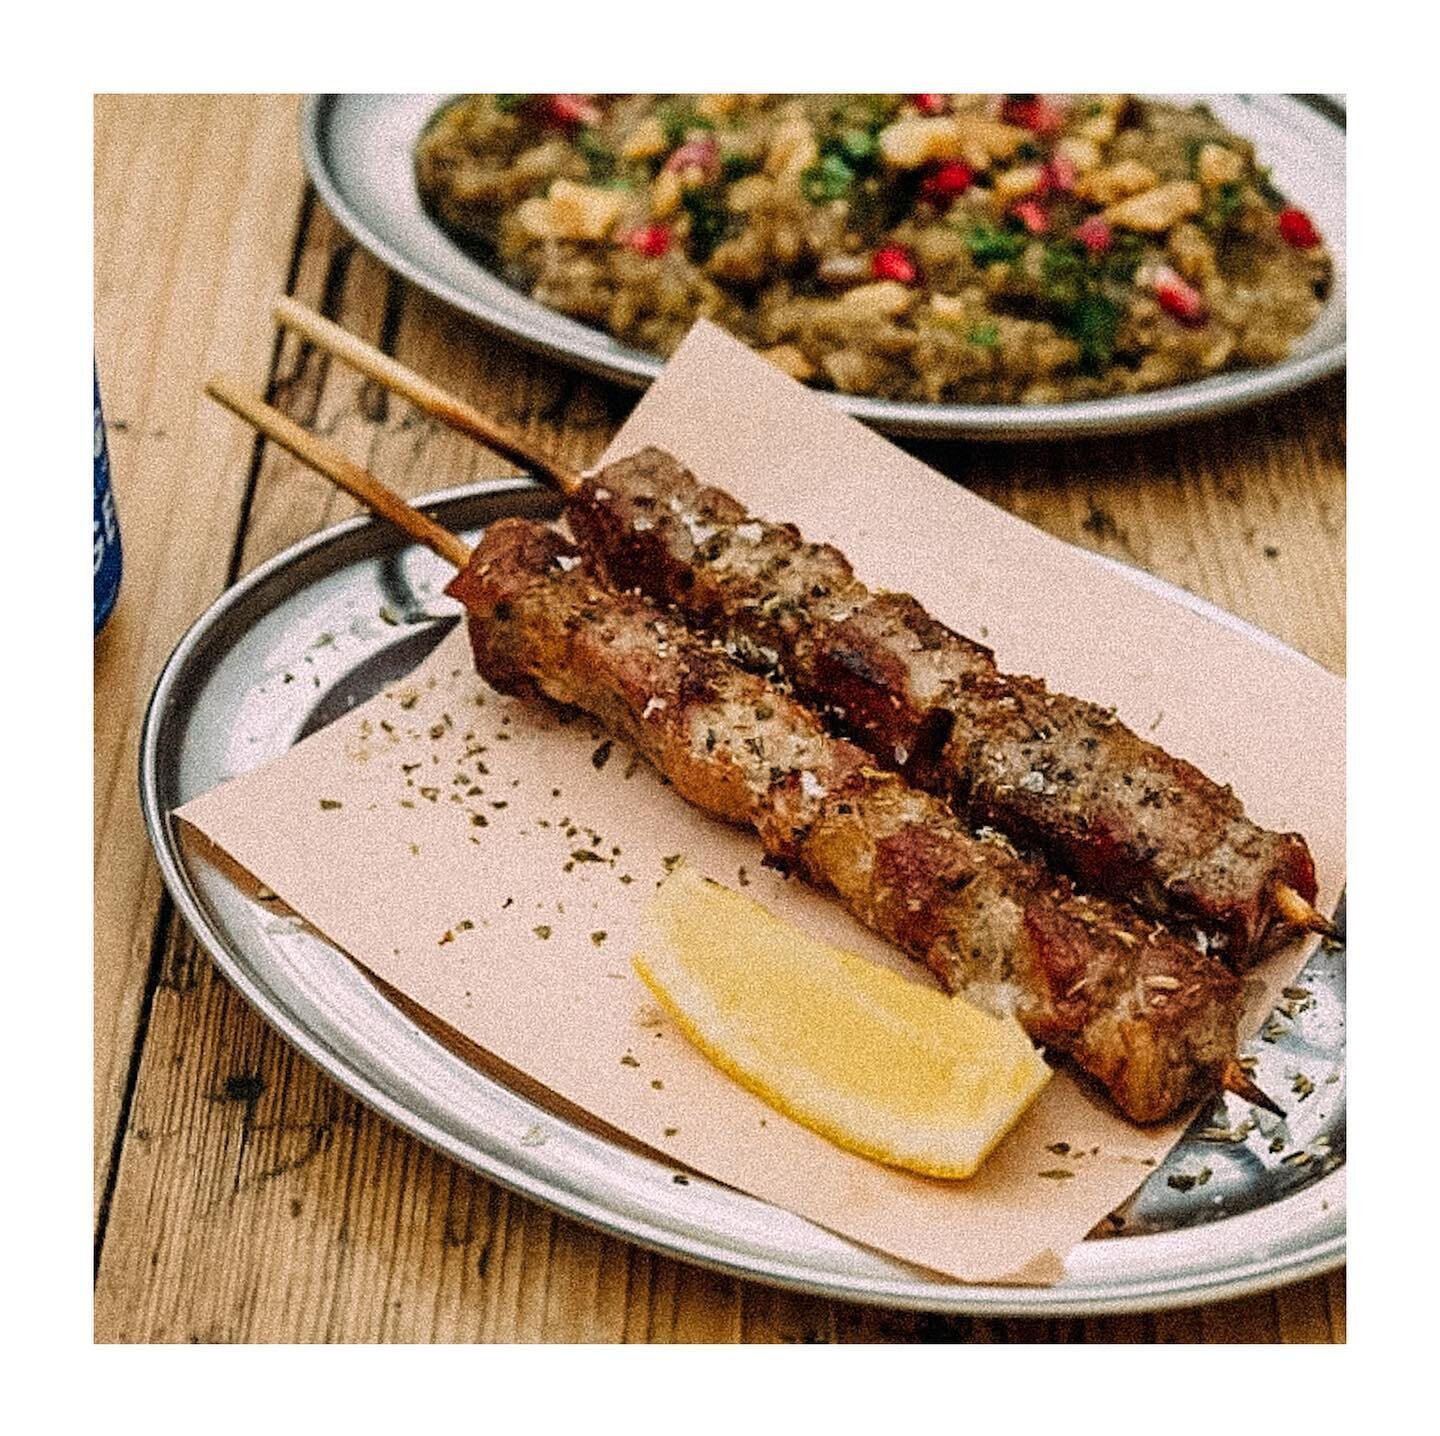 Introducing our handmade pork skewers, the pioneers of our menu! 🍢✨ Whenever we find ourselves in Athens, it's an unwavering tradition to indulge in these skewers at any souvlatzidiko we stumble upon. 🇬🇷 But let us share the story behind this part